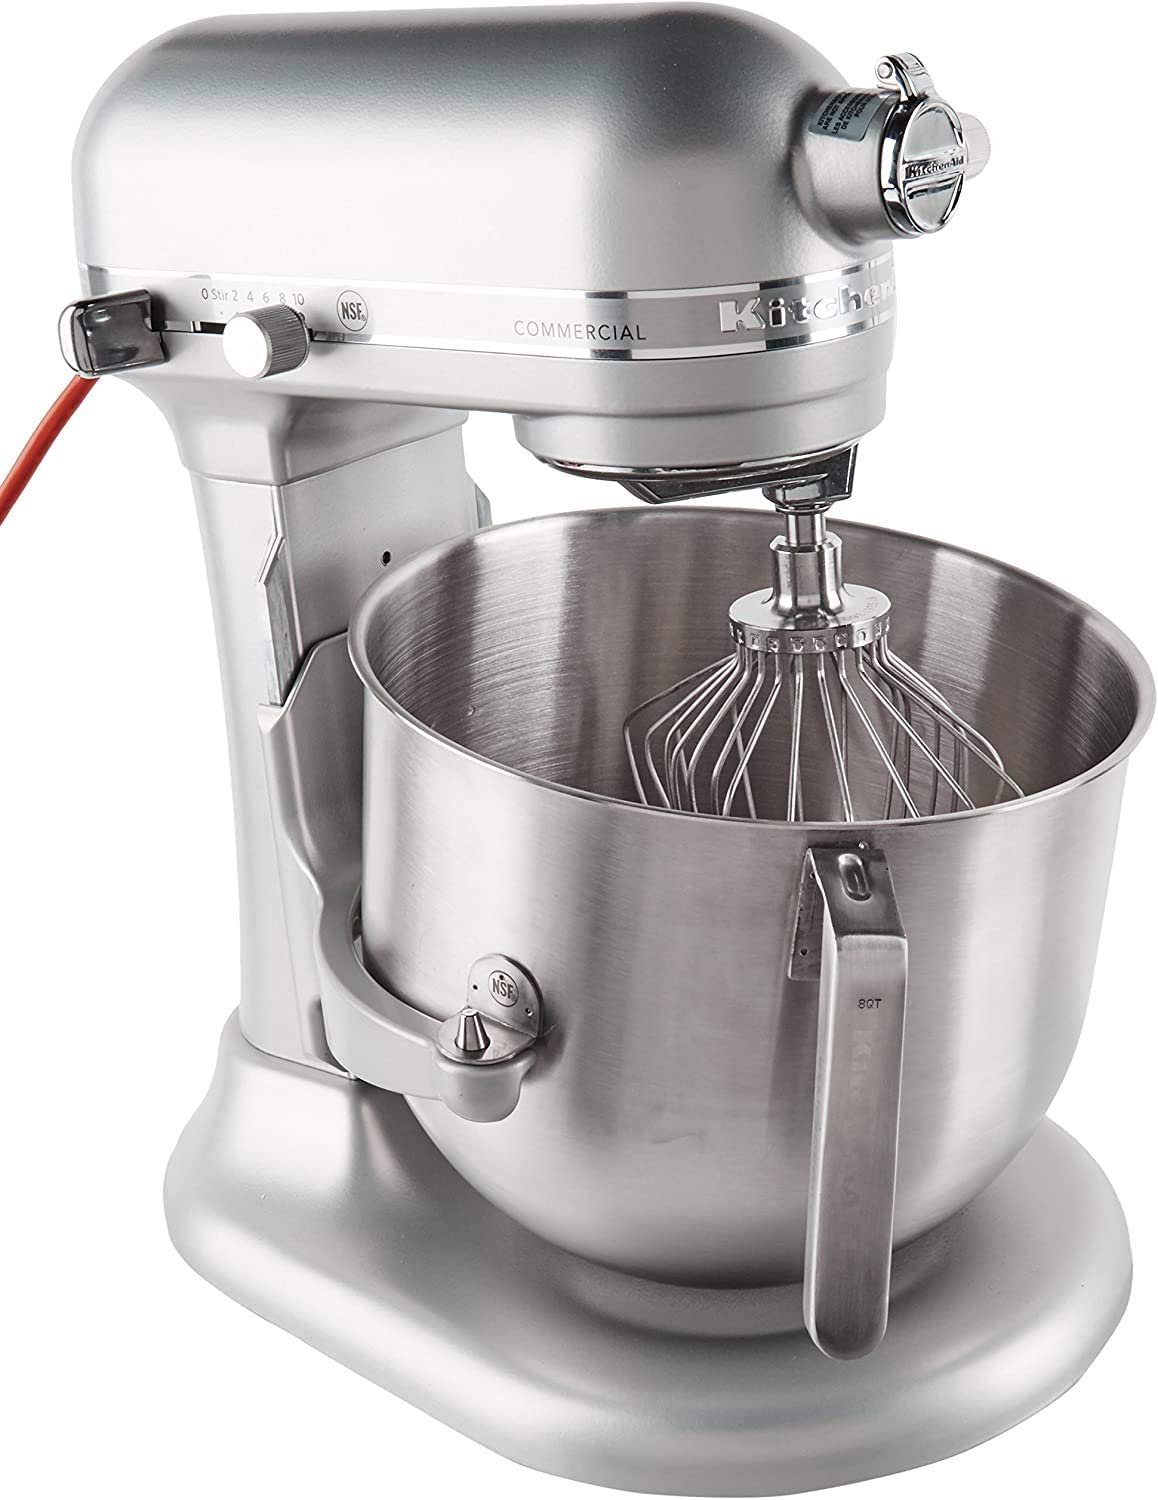 KitchenAid NSF Certified Commercial Series 8 Quart Bowl Lift Stand Mixer, - image 2 of 8